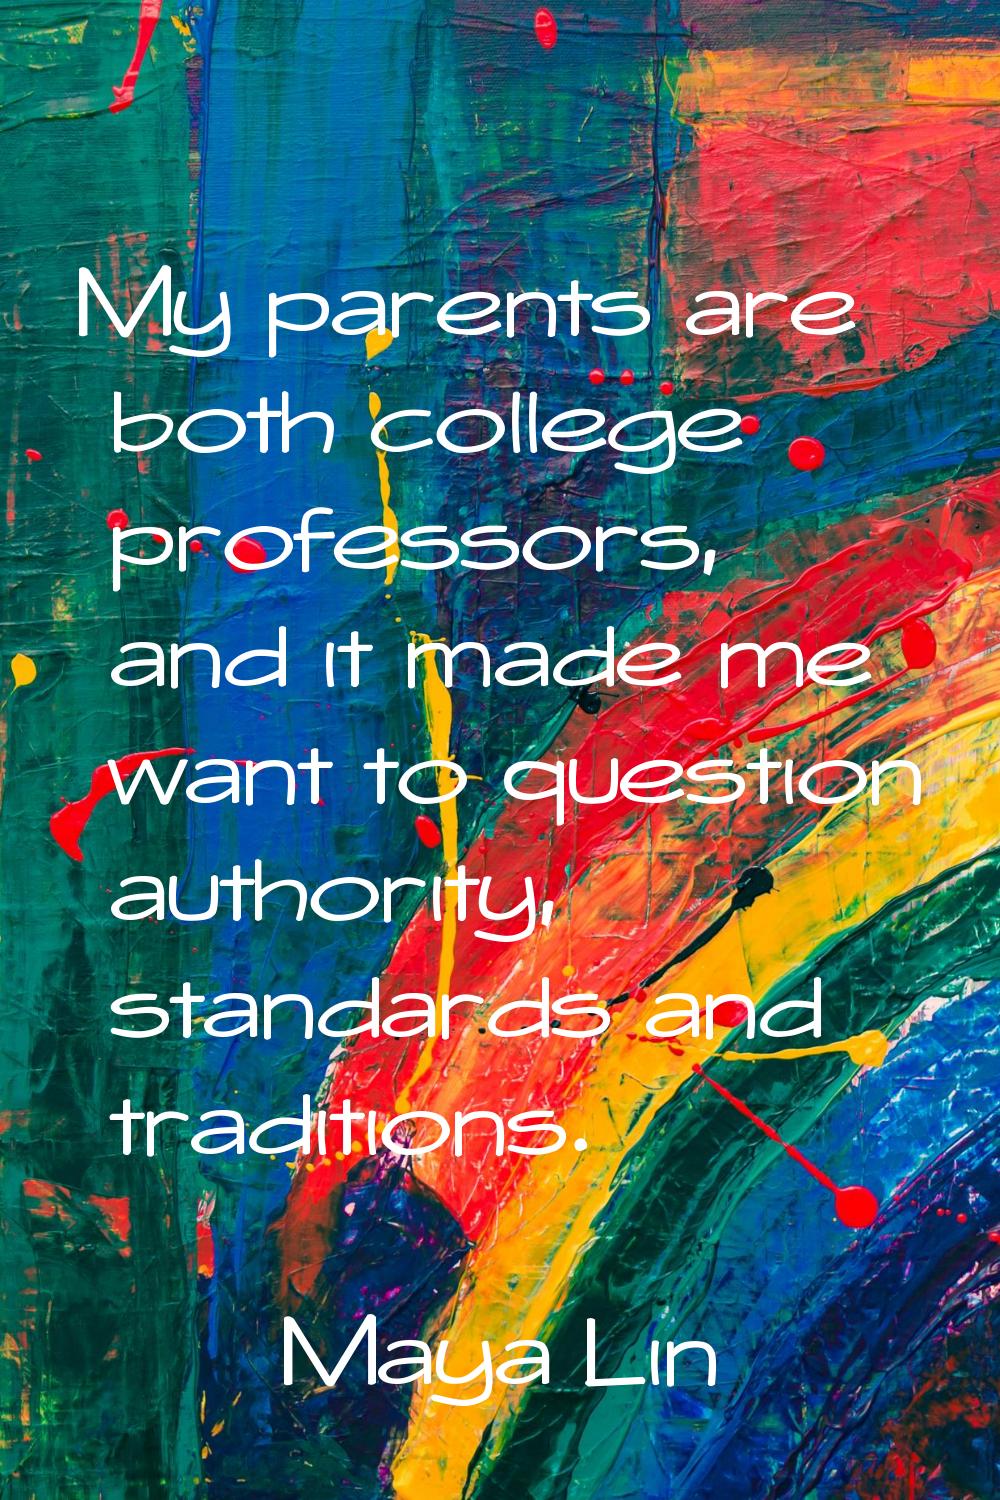 My parents are both college professors, and it made me want to question authority, standards and tr